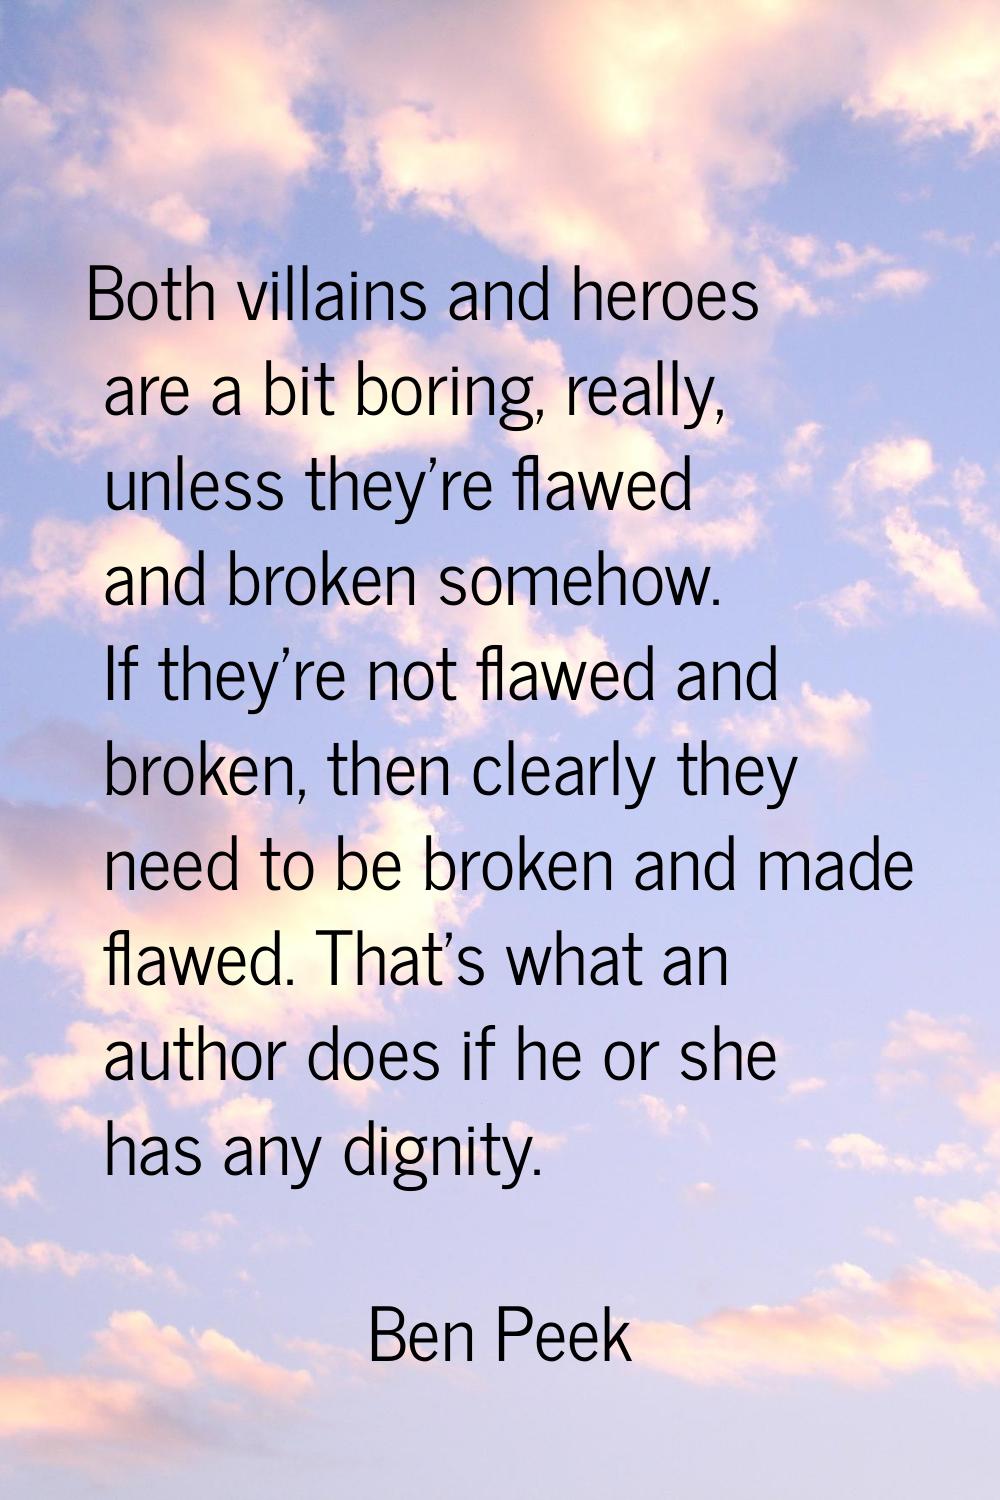 Both villains and heroes are a bit boring, really, unless they're flawed and broken somehow. If the